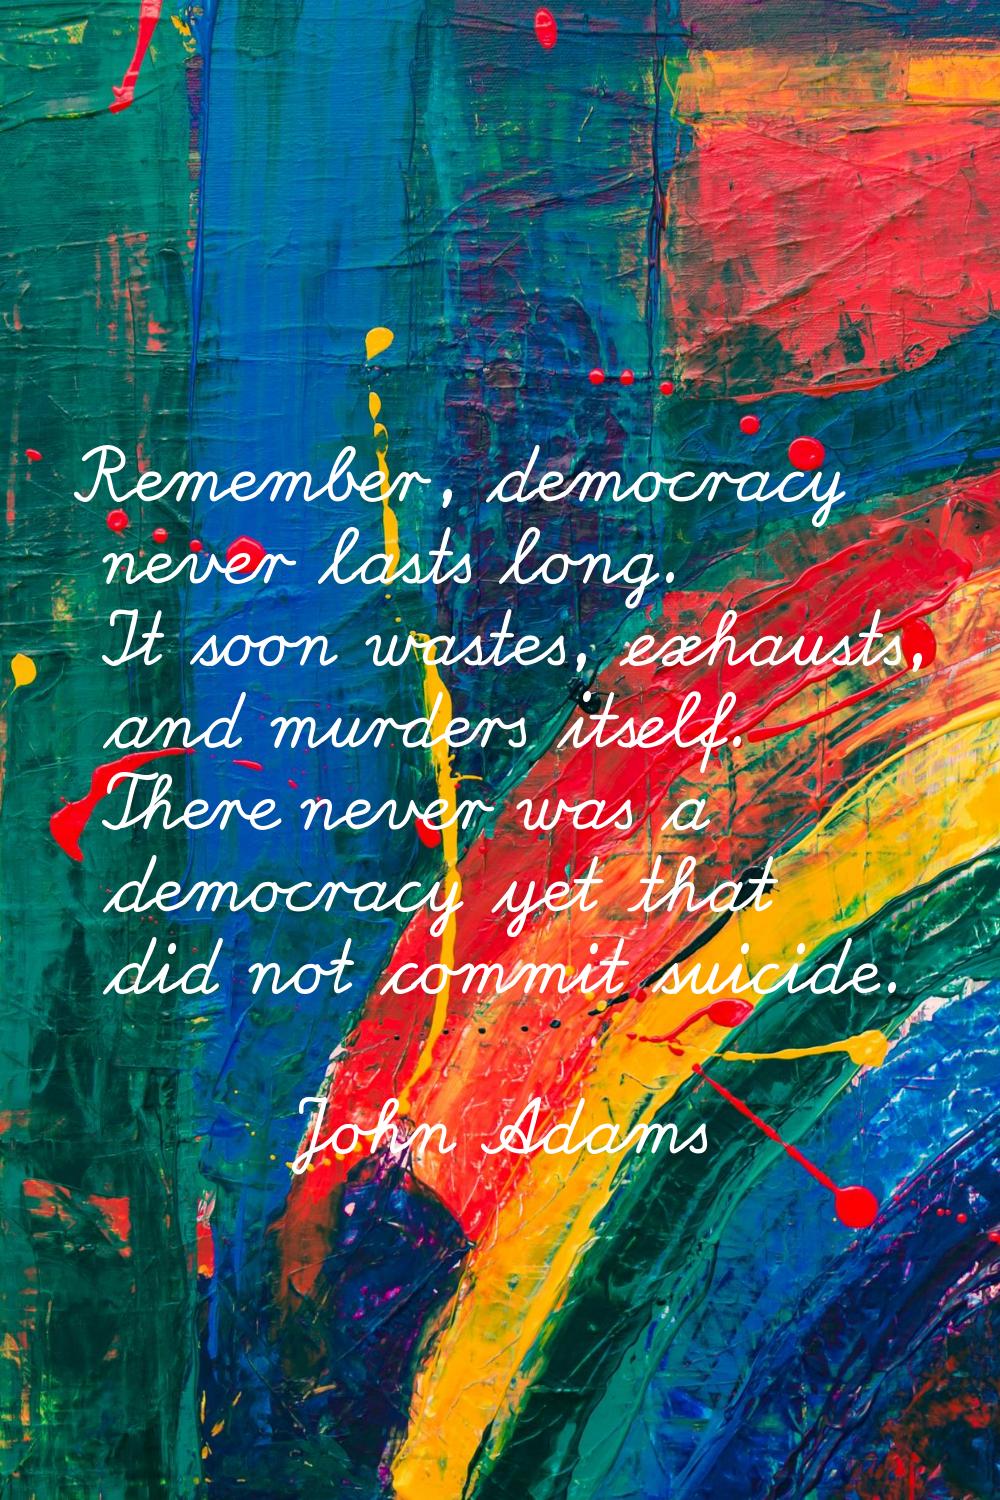 Remember, democracy never lasts long. It soon wastes, exhausts, and murders itself. There never was